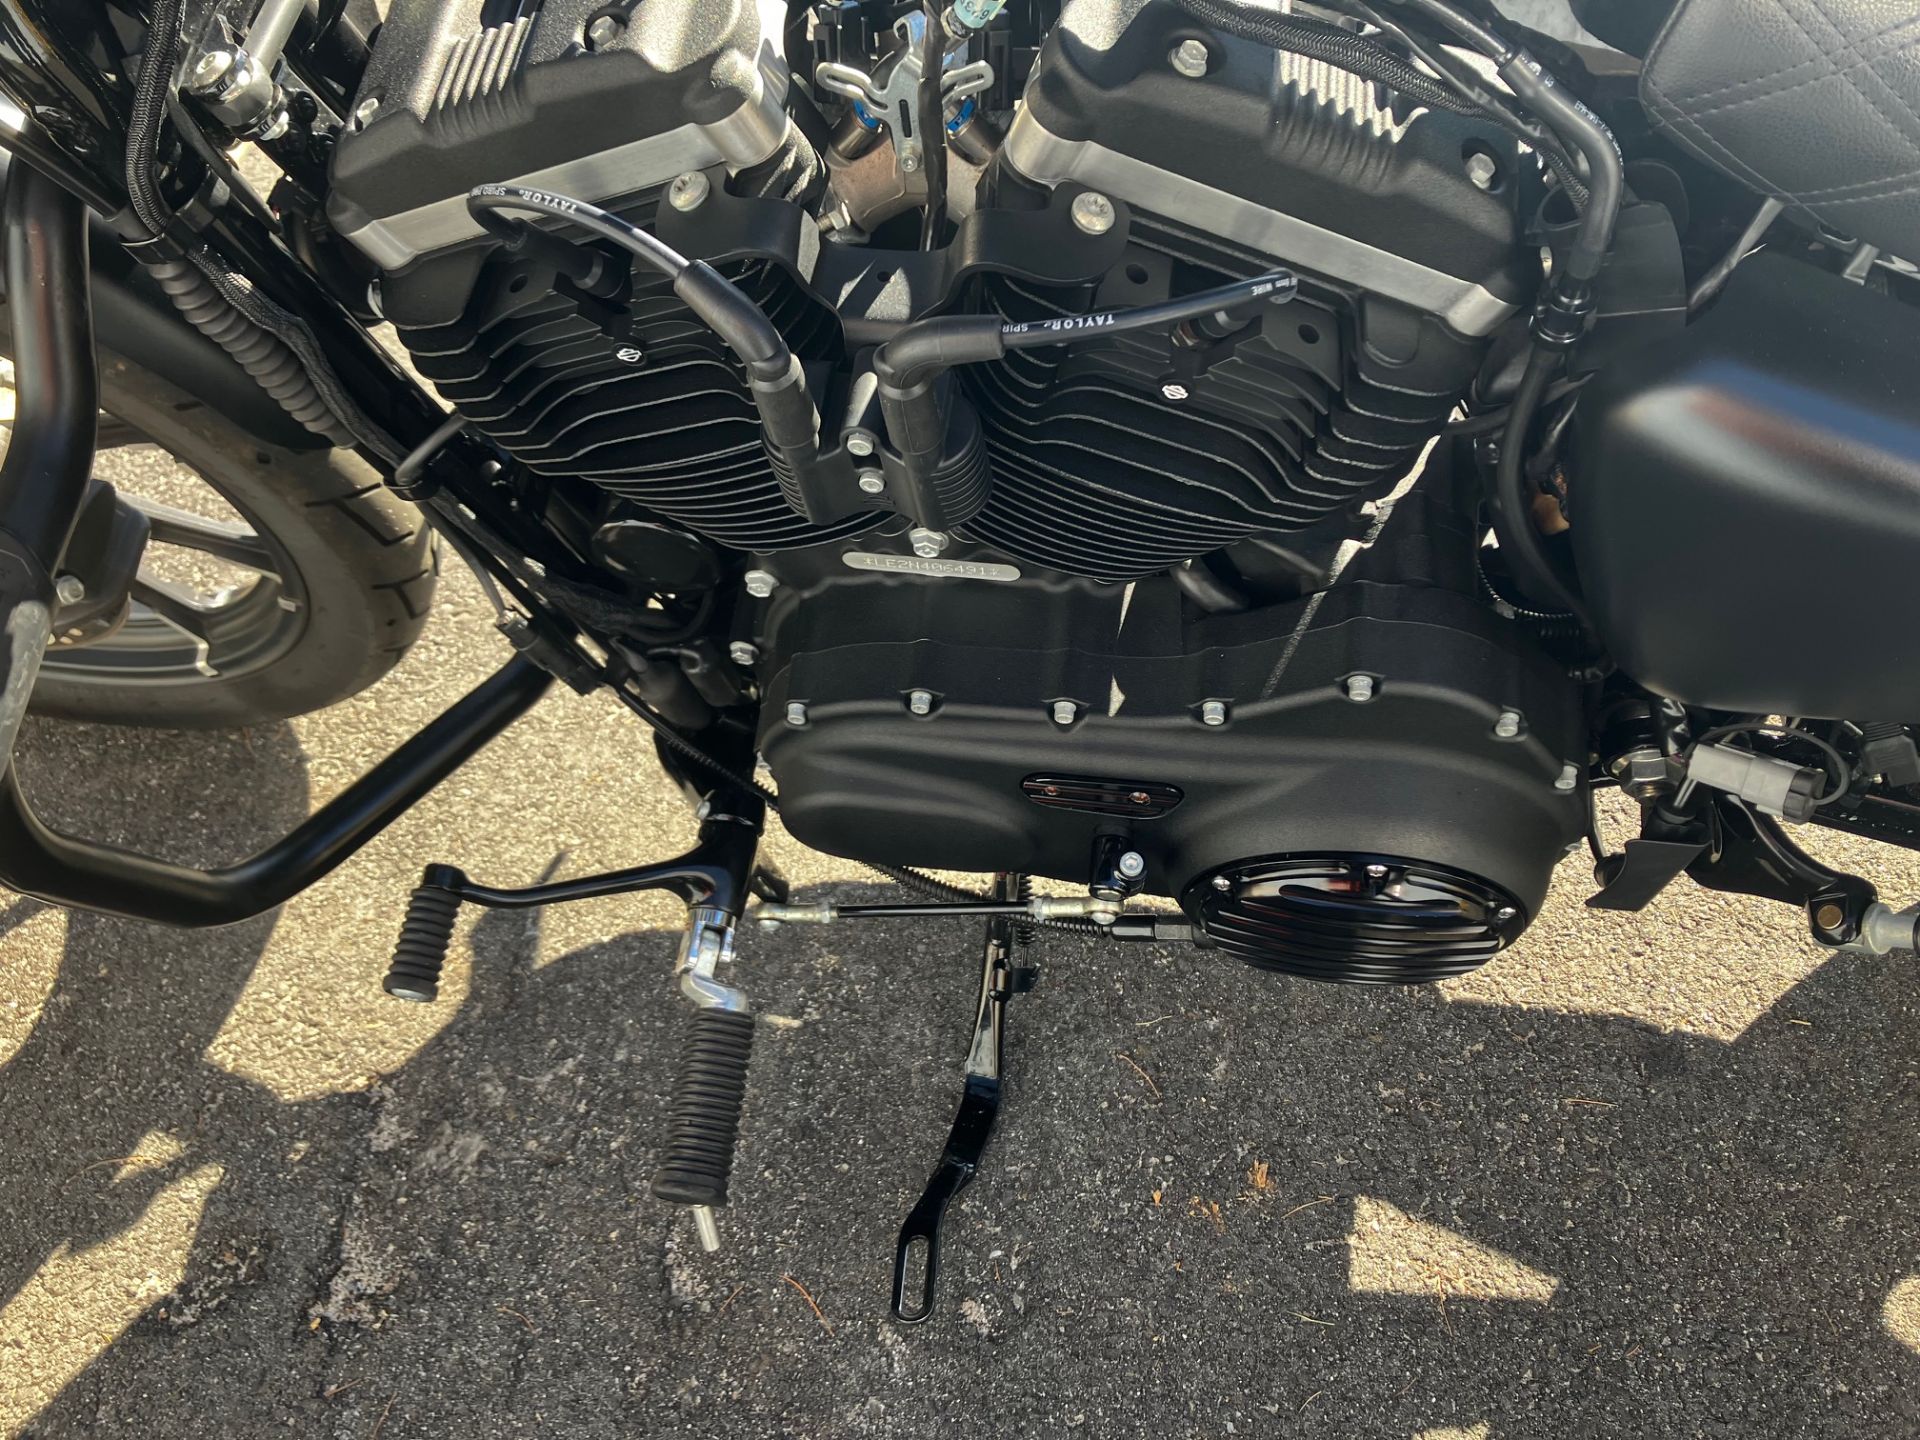 2022 Harley-Davidson IRON 883 (1200R CONVERSION) in West Long Branch, New Jersey - Photo 9